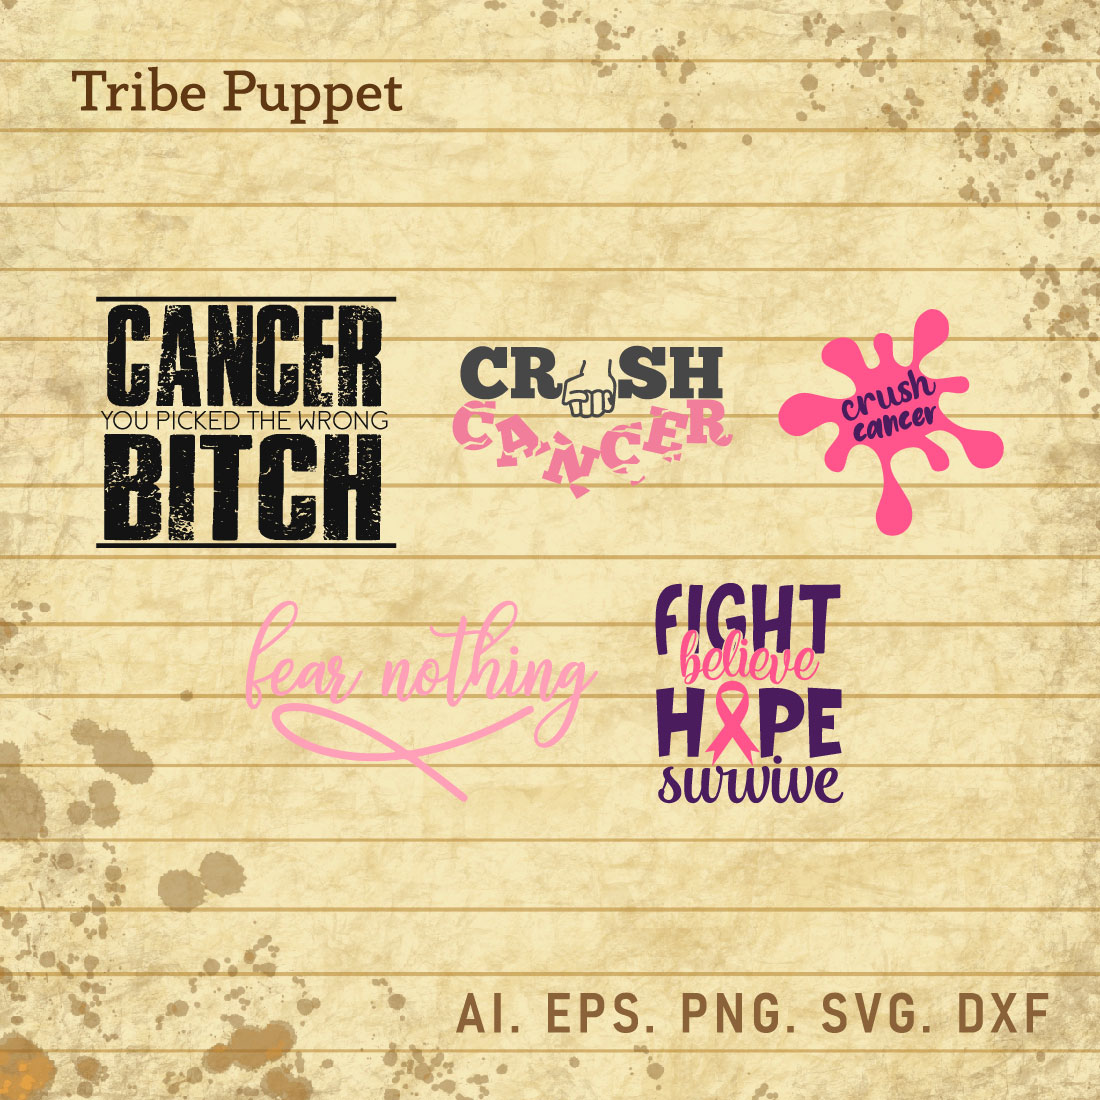 Breast Cancer Typo Bundle cover image.